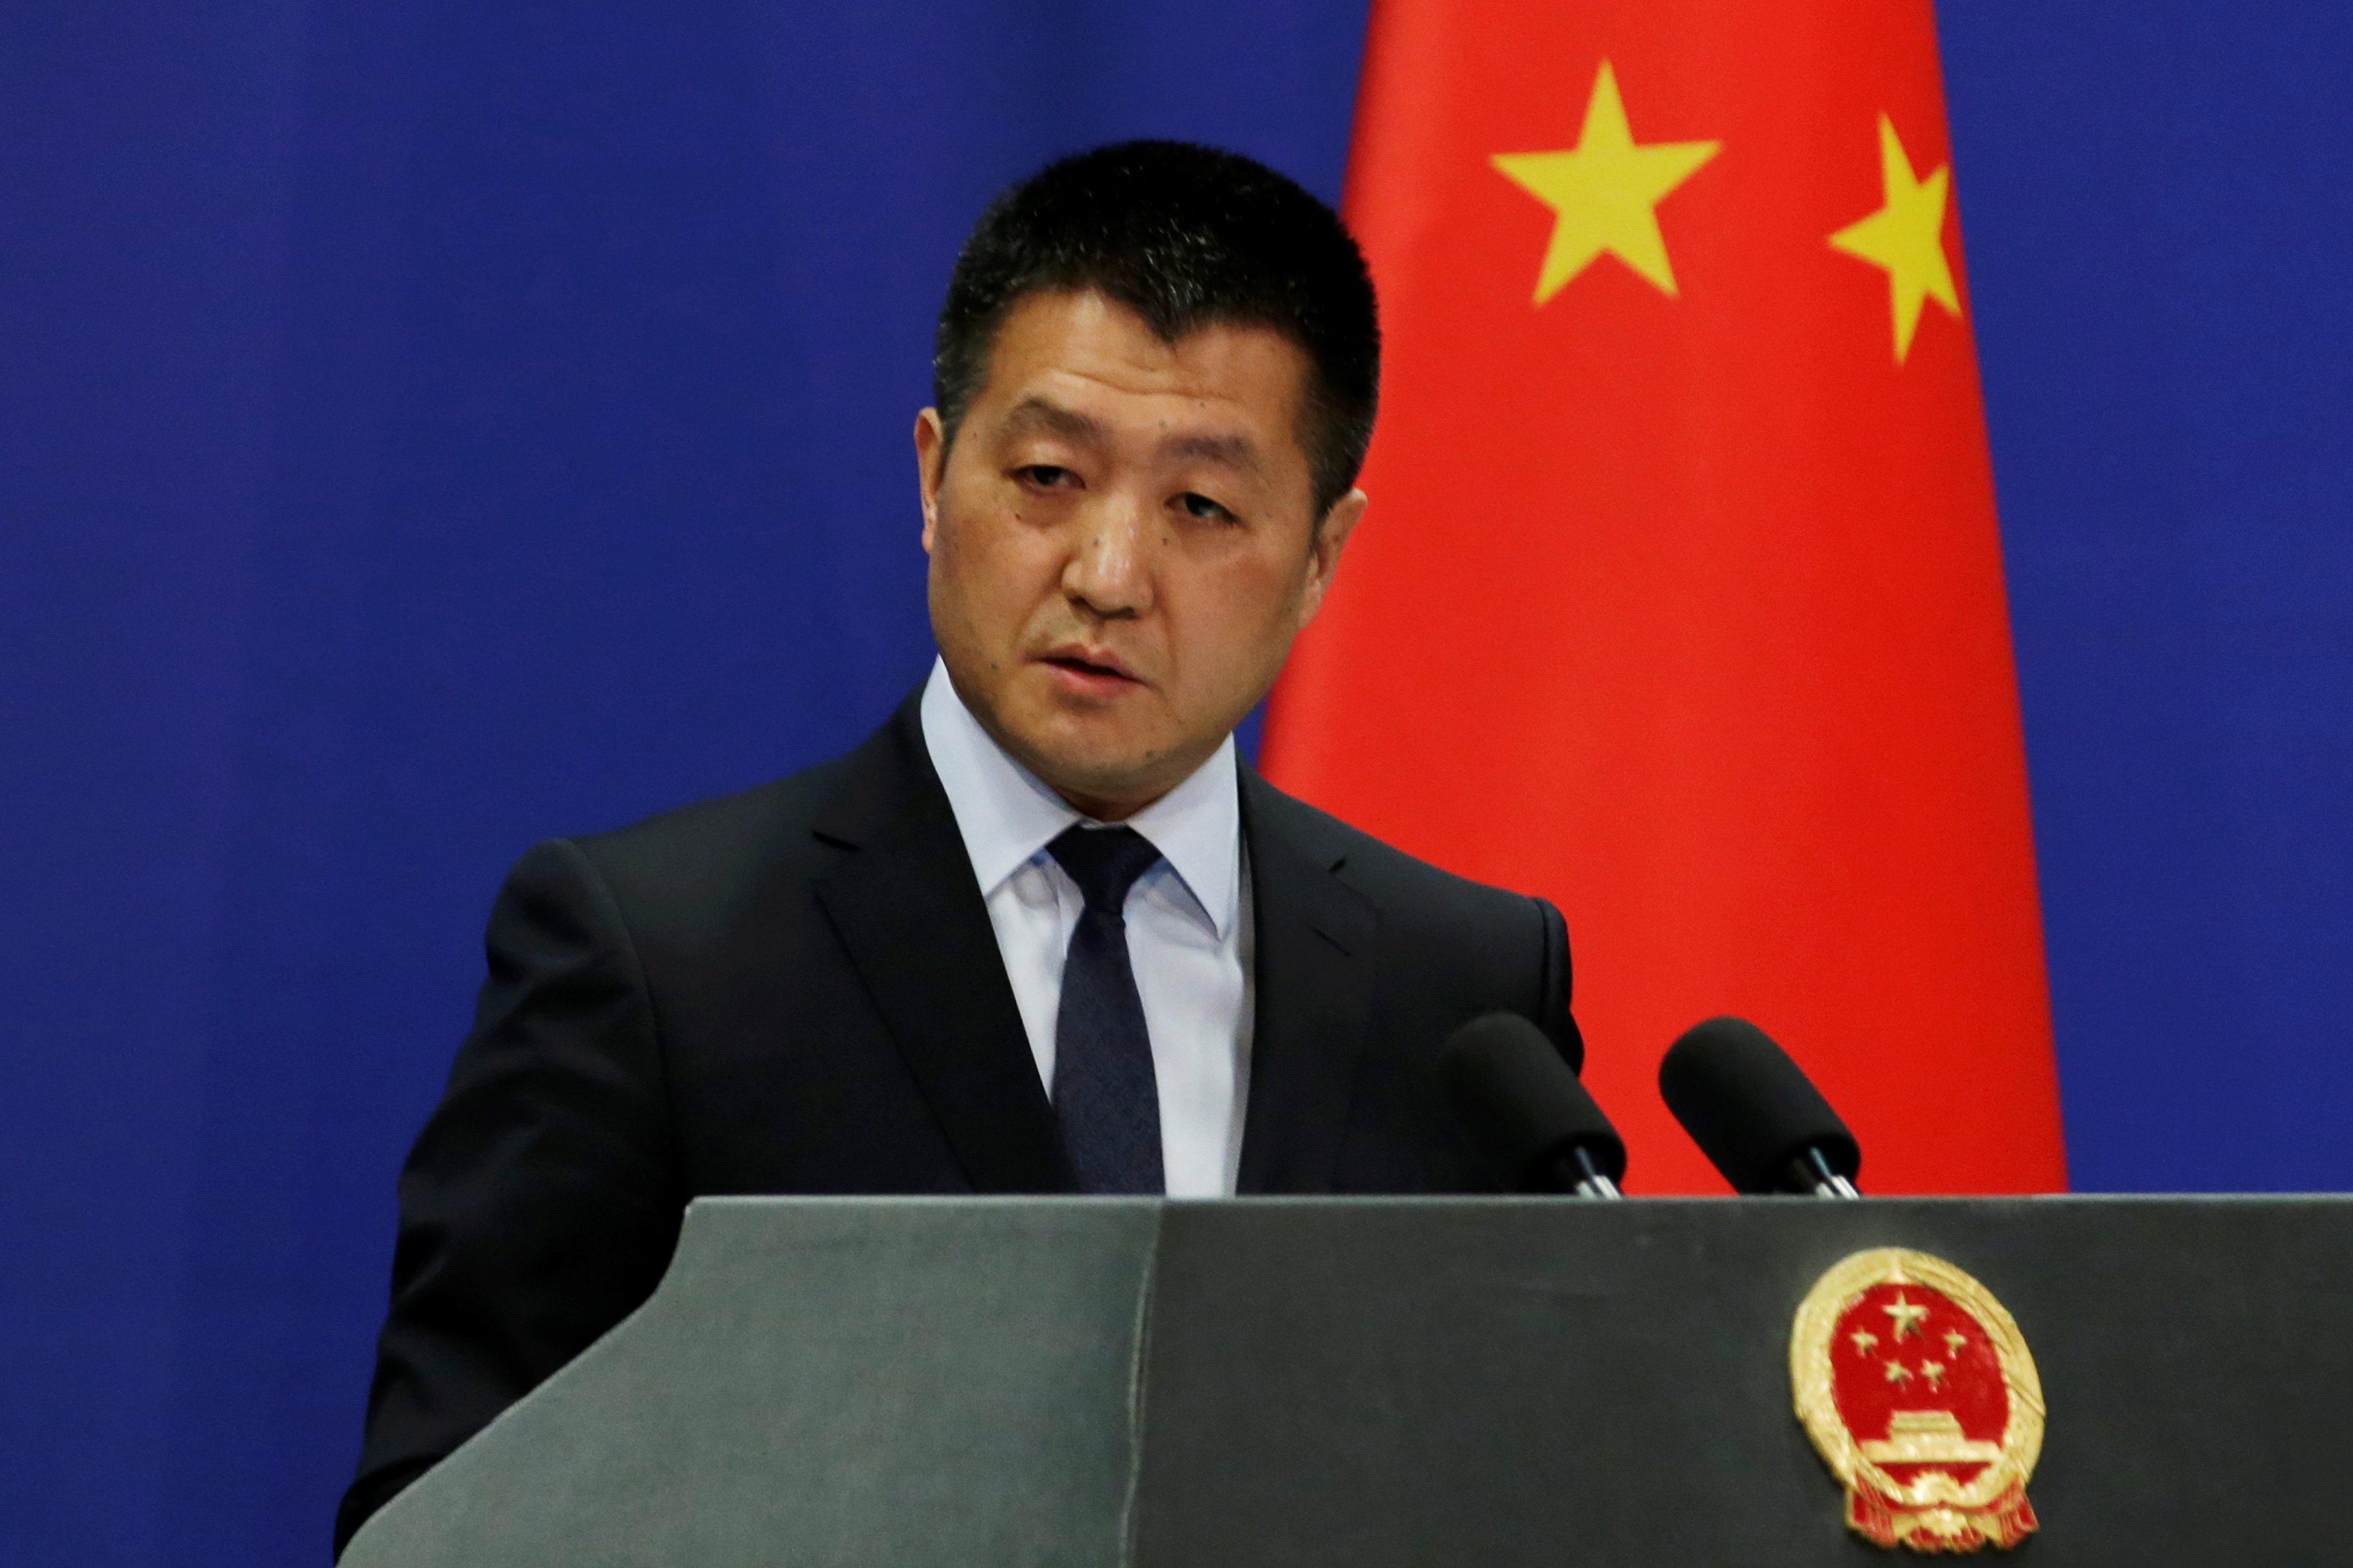 Chinese Foreign Ministry spokesman Lu Kang answers questions about a major bus accident in North Korea, during a news conference in Beijing, China April 23, 2018. REUTERS/Jason Lee